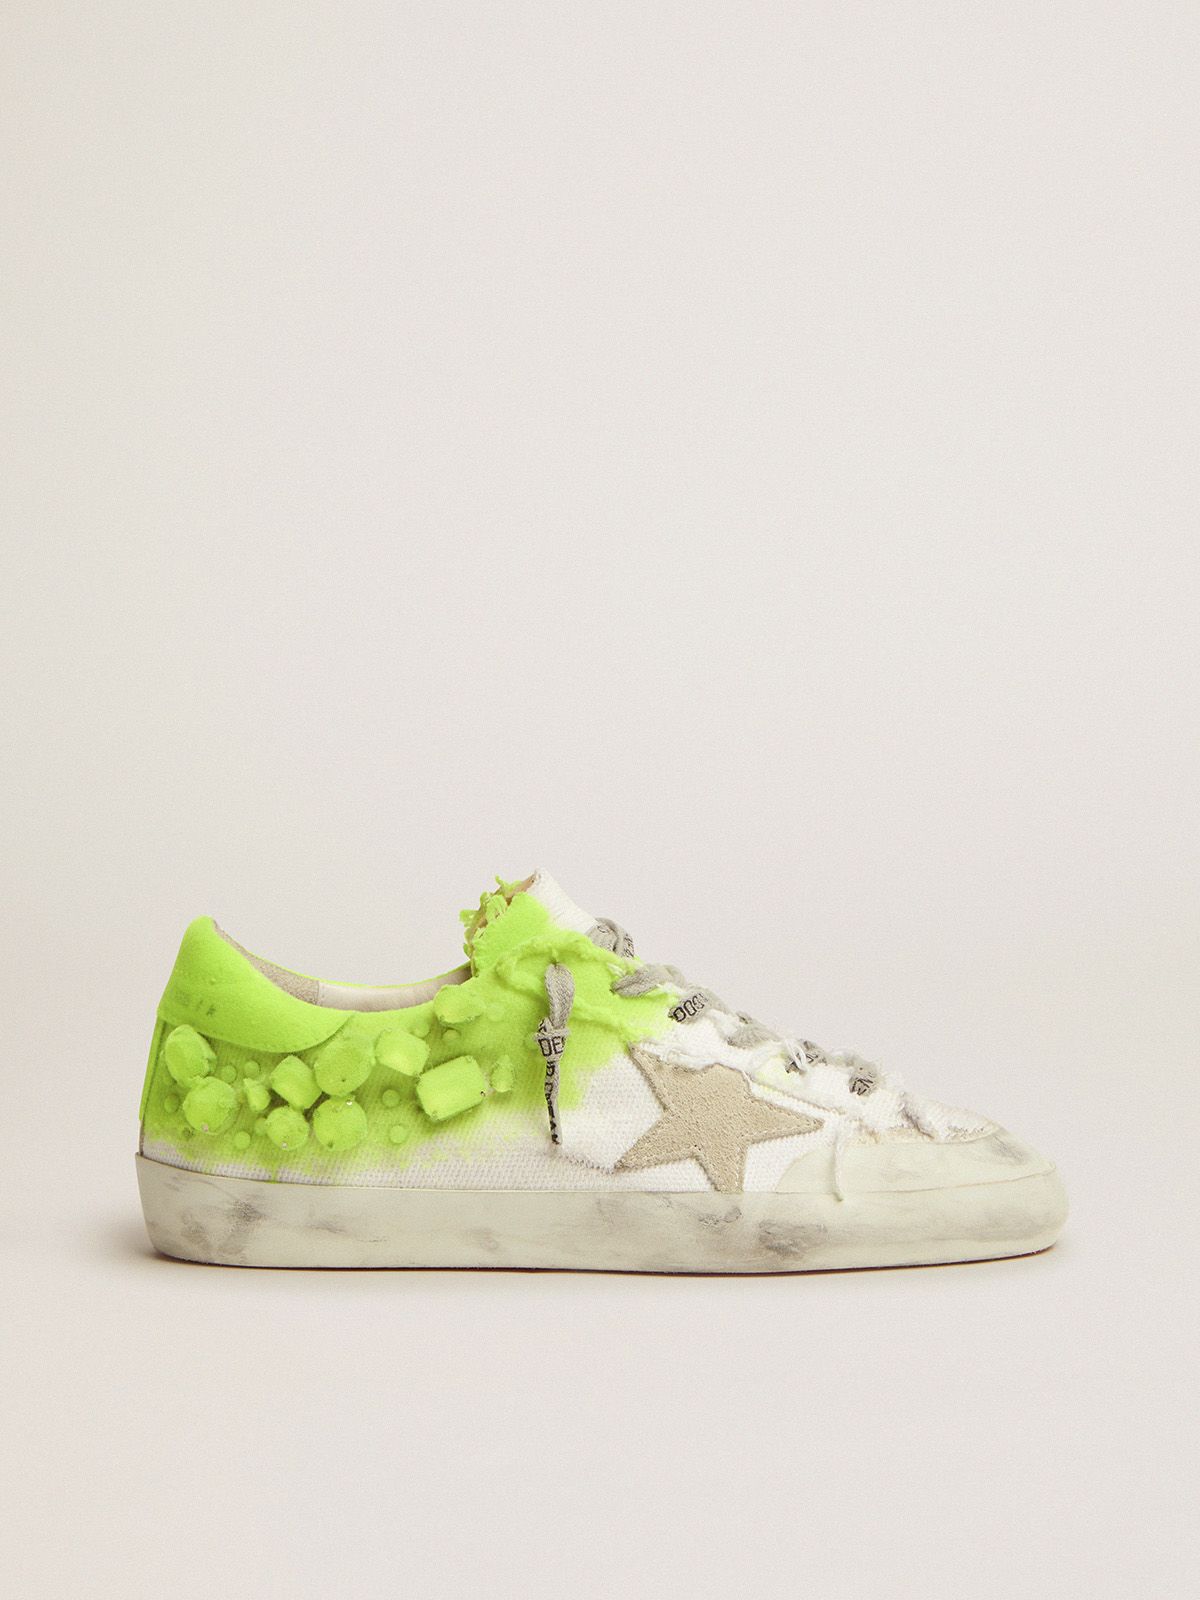 golden goose crystals flock fluorescent in with white sneakers and Super-Star canvas paint yellow